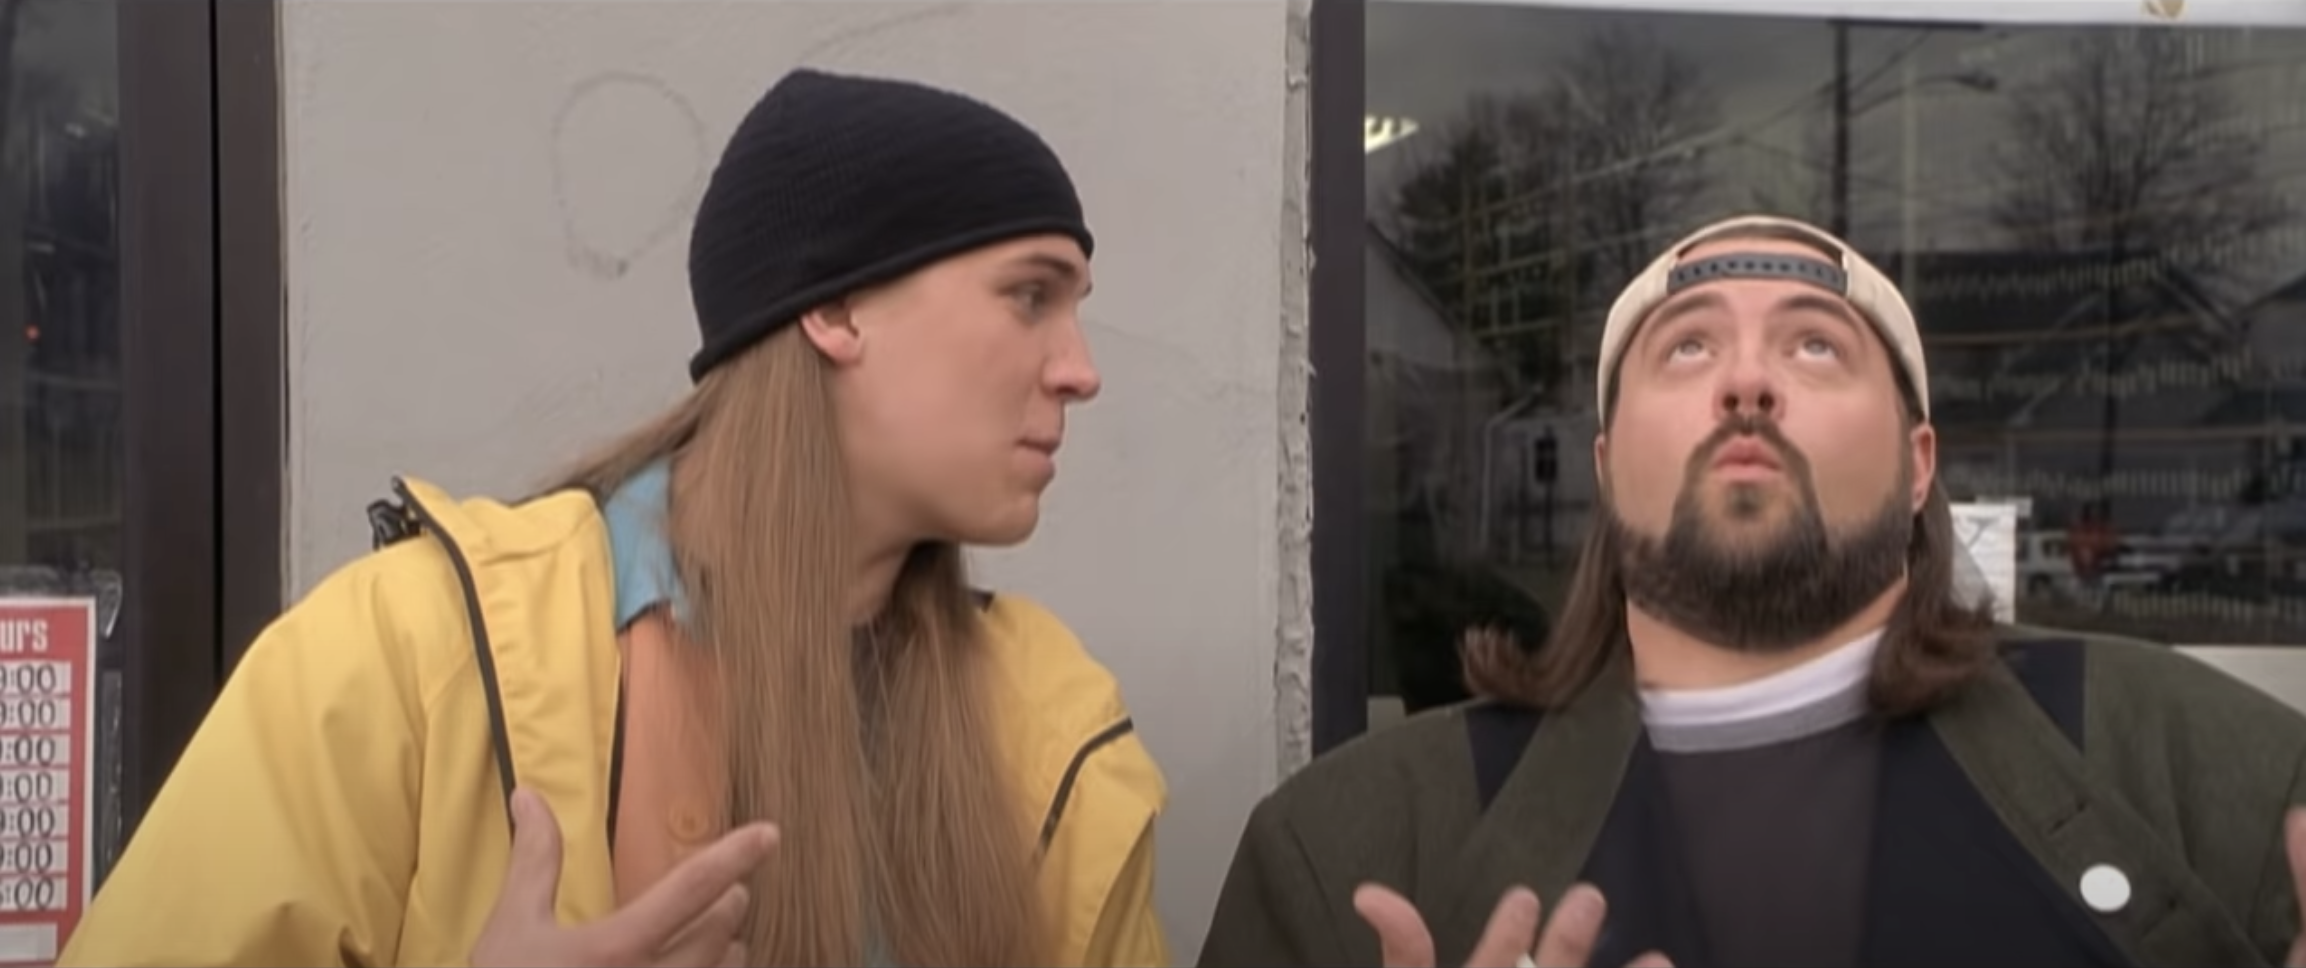 Jay and Silent Bob dancing outside a store